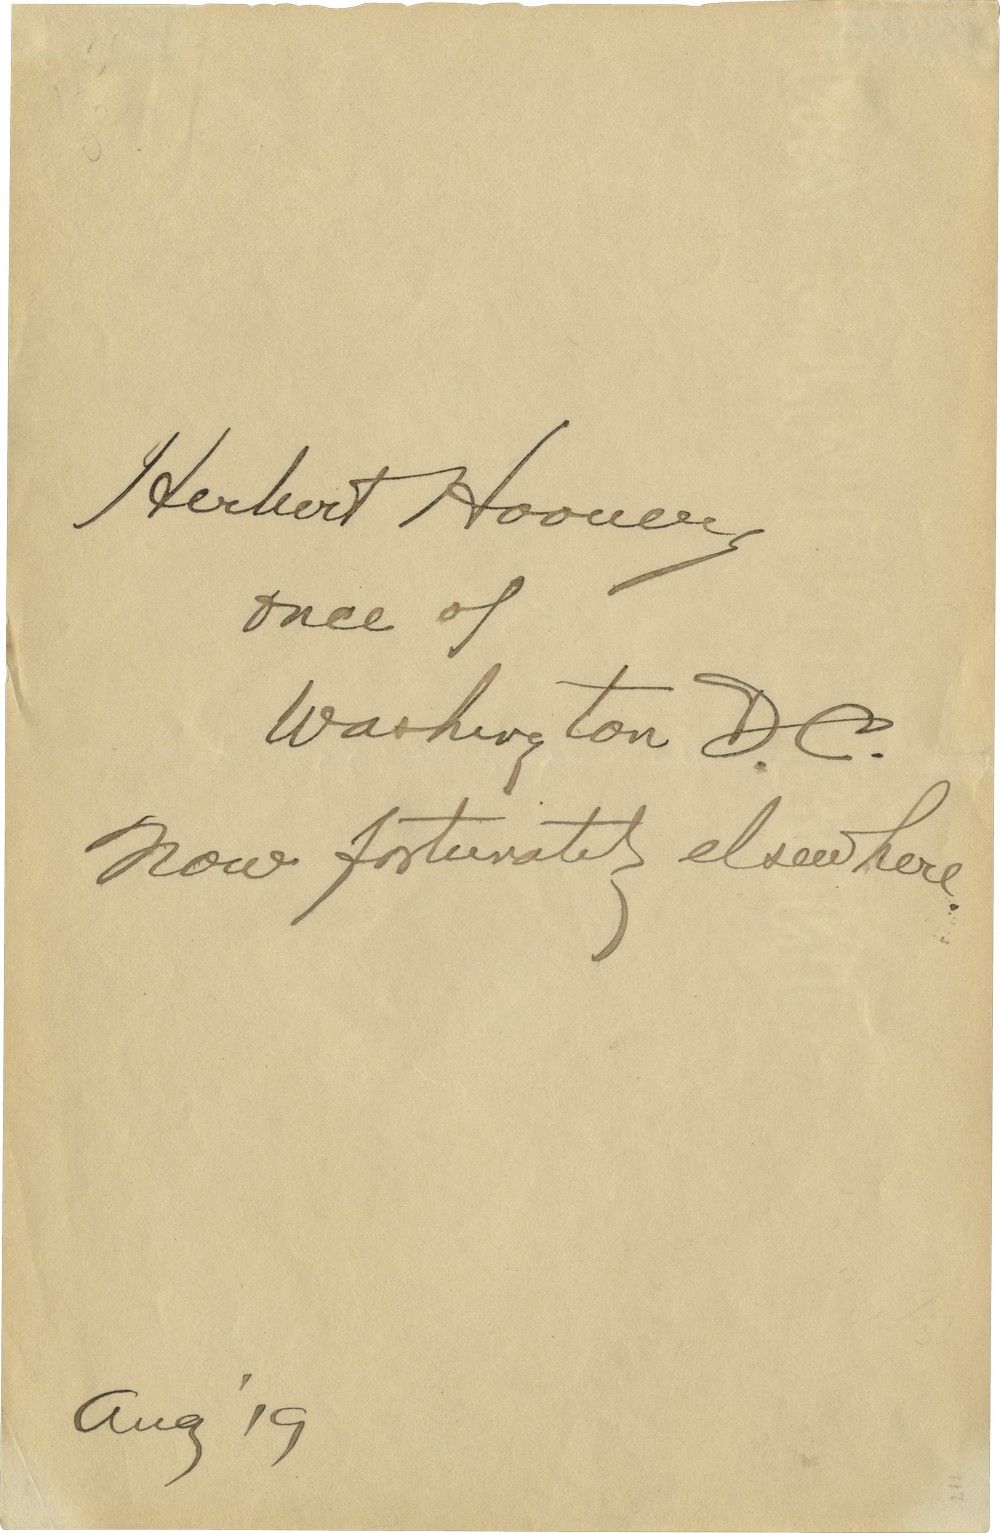 Herbert Hoover Describes Himself "Once of Washington D.C. Now Fortunately Elsewhere"